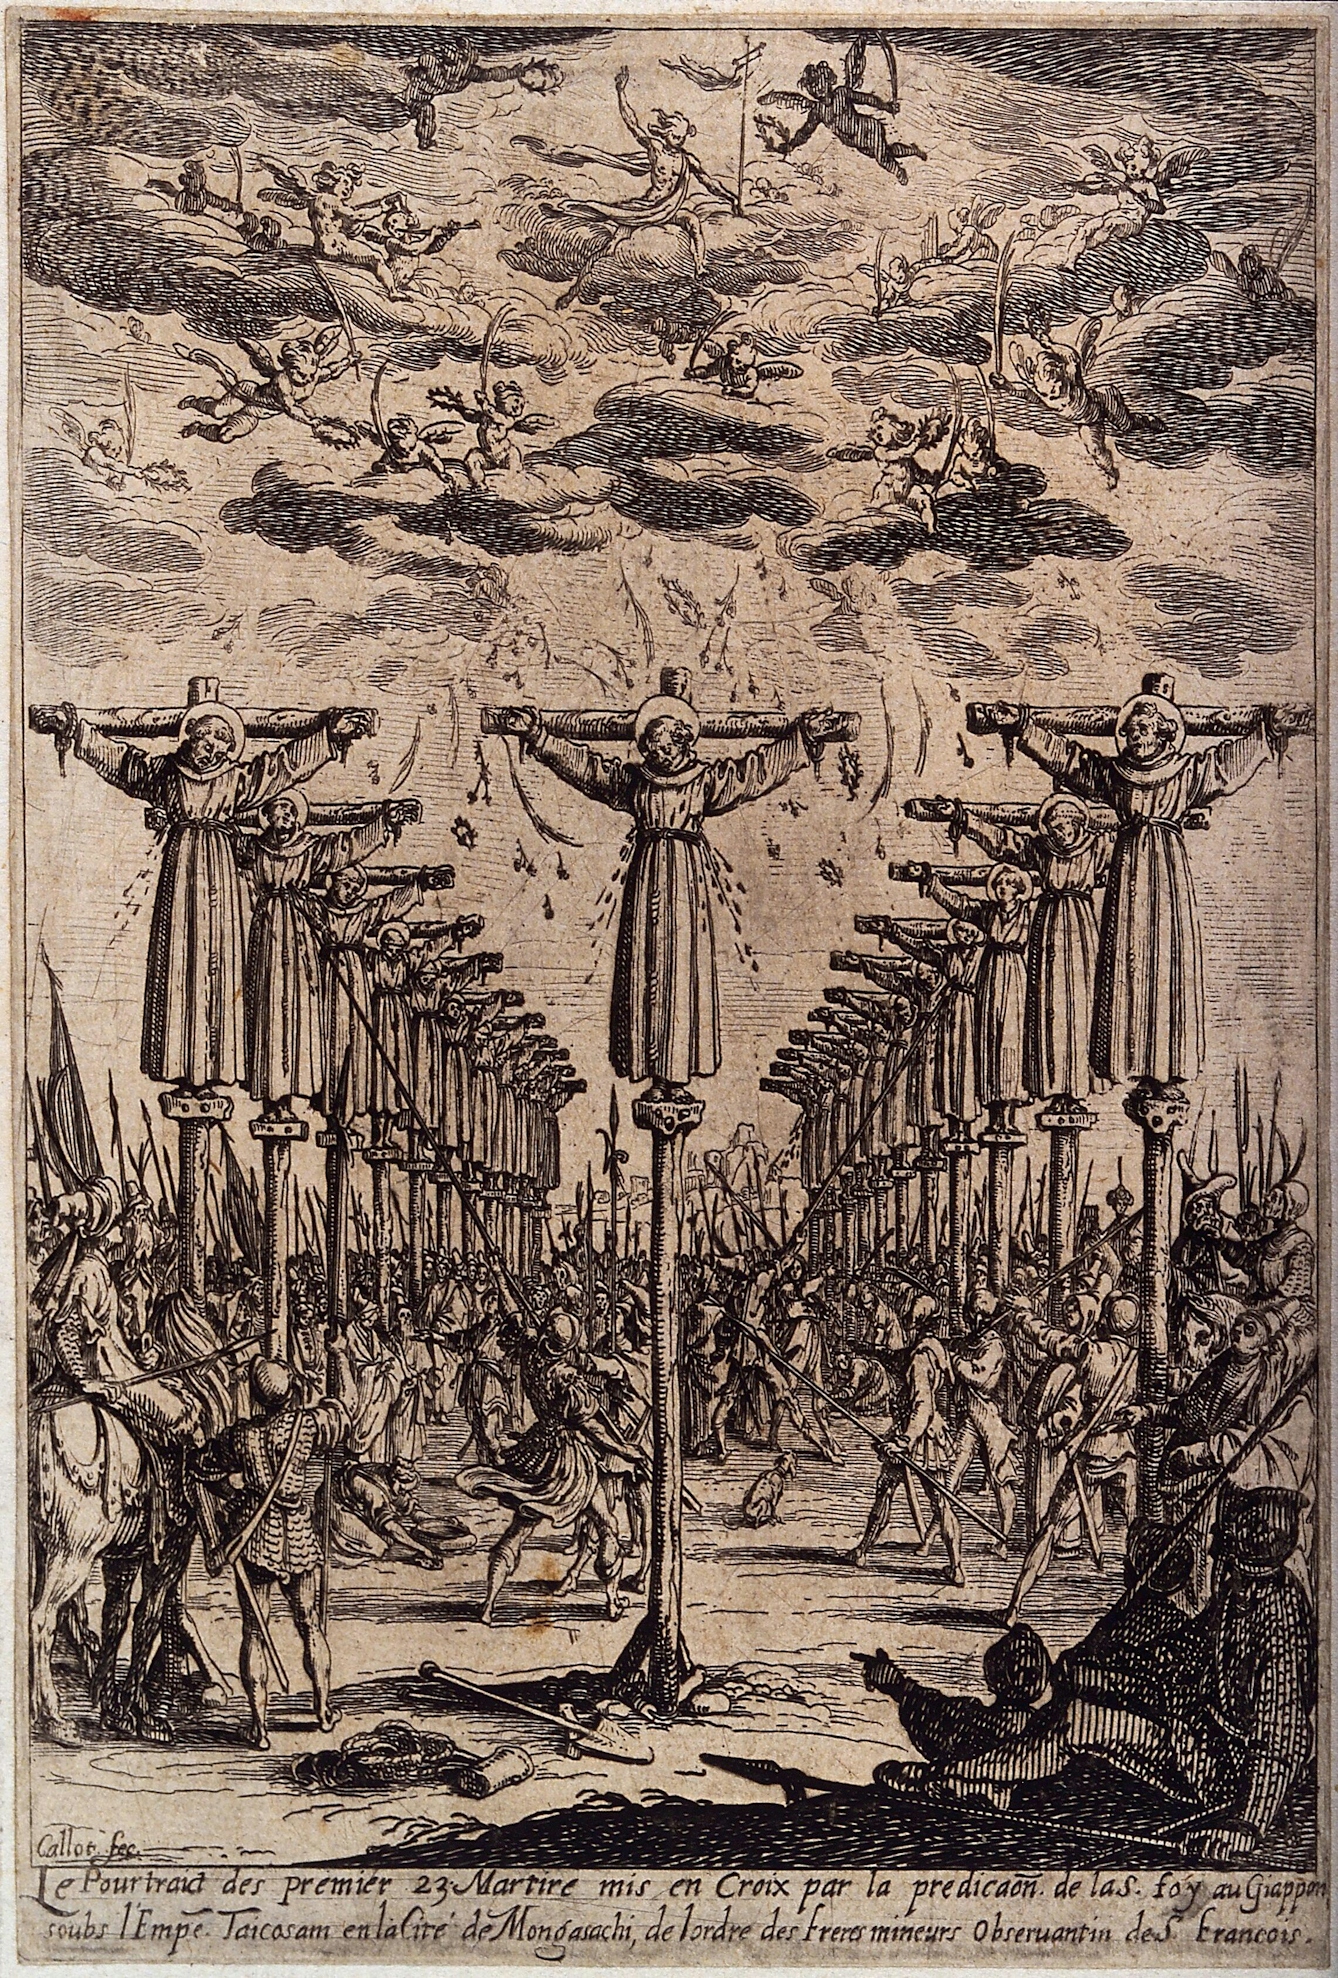 Black and white etching showing rows and rows of people in robes being crucified. They have halos. Below them, many people mill about bearing weapons and some are poking up at the people being crucified. Above them, winged figures are flying in the clouds. 